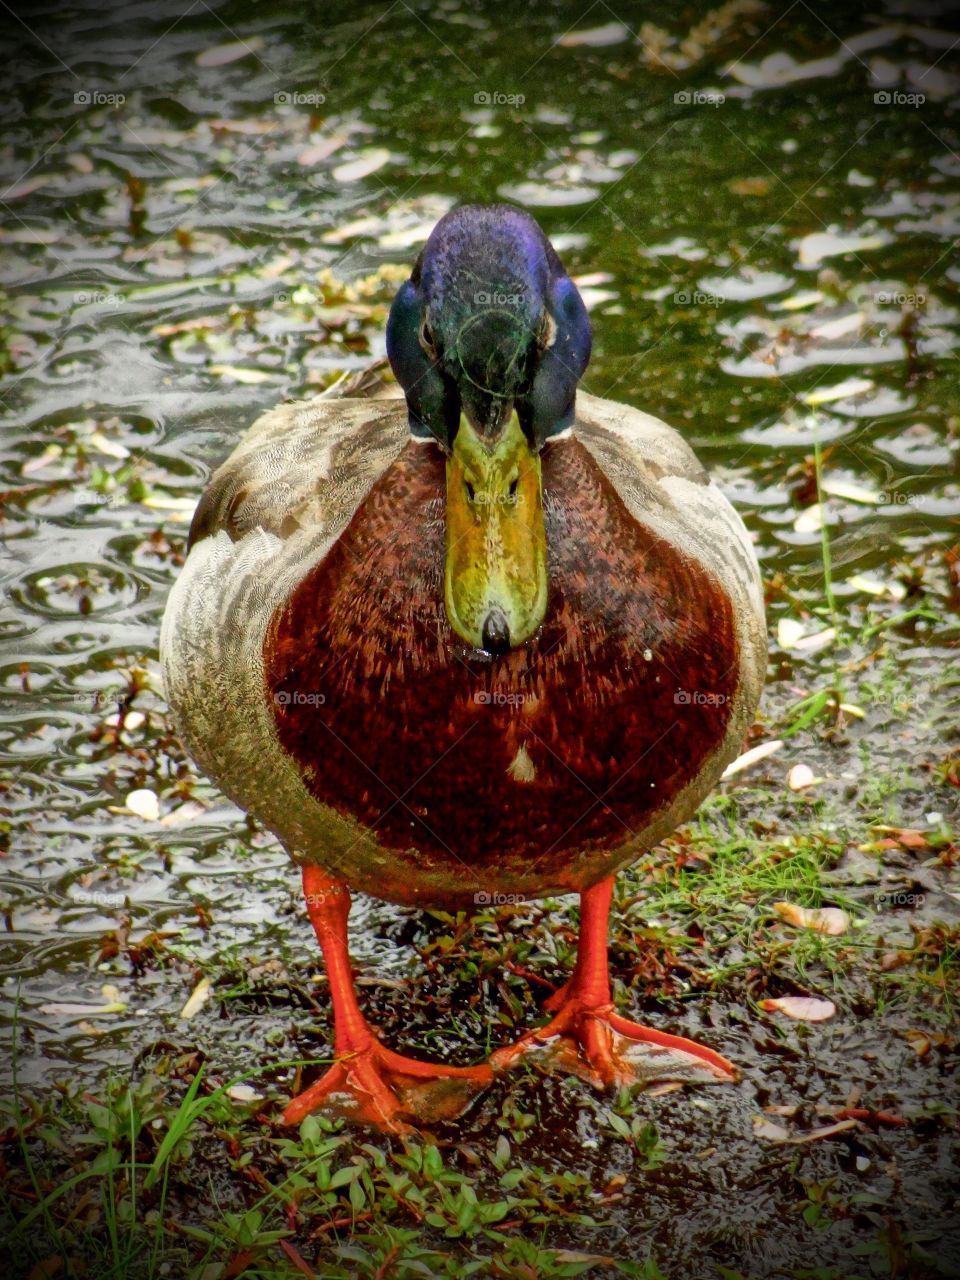 Scarface- you lookin at me?!?. Pure duck-titude! Battle scarred mallard staring me down as if to say " you lookin' at me???